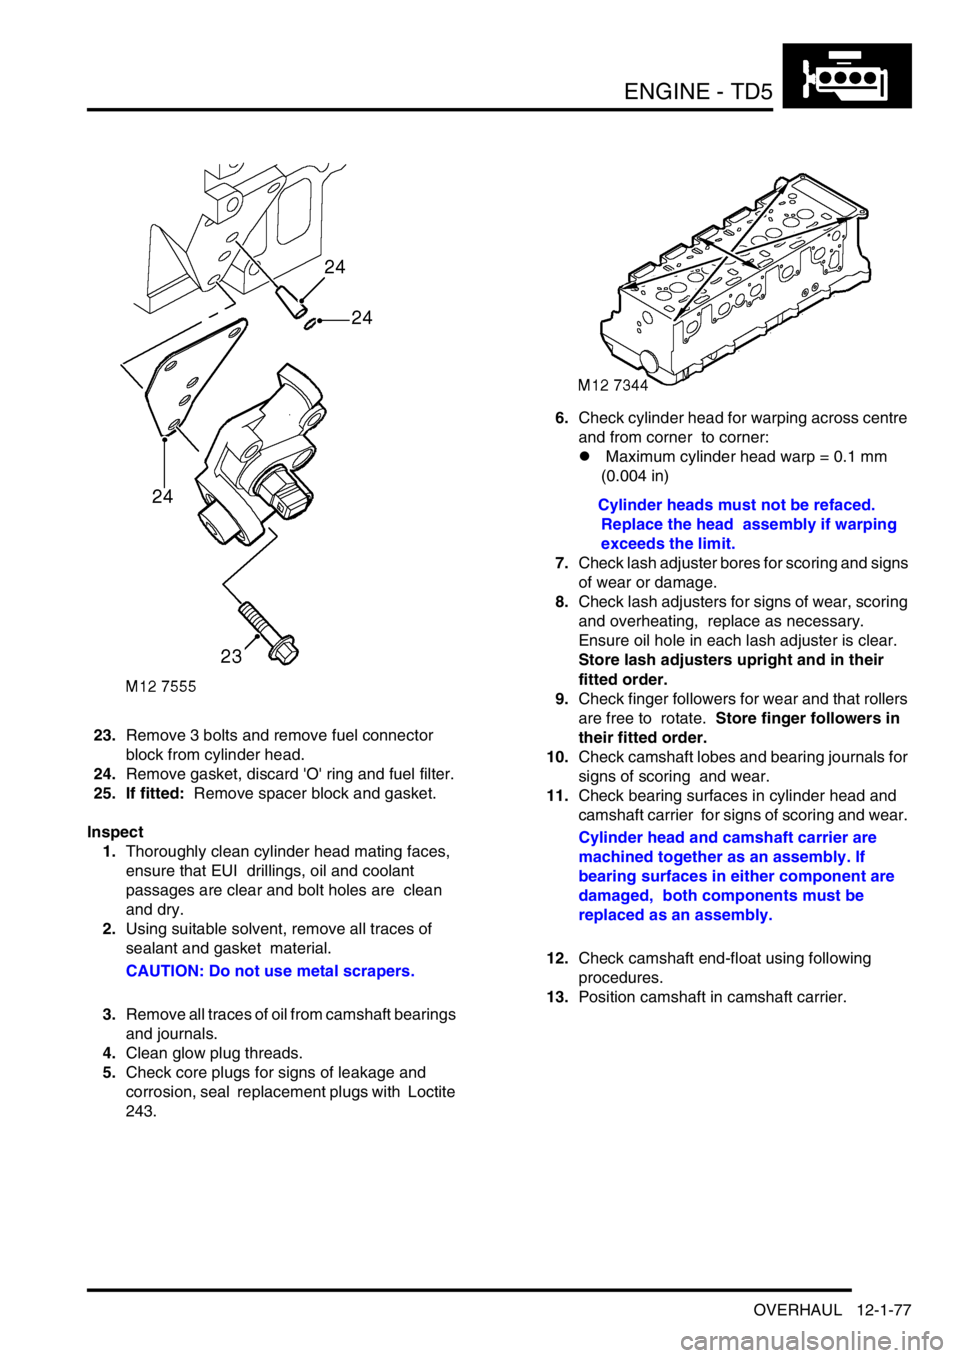 LAND ROVER DISCOVERY 2002  Workshop Manual ENGINE - TD5
OVERHAUL 12-1-77
23.Remove 3 bolts and remove fuel connector 
block from cylinder head. 
24.Remove gasket, discard O ring and fuel filter. 
25. If fitted:  Remove spacer block and gaske